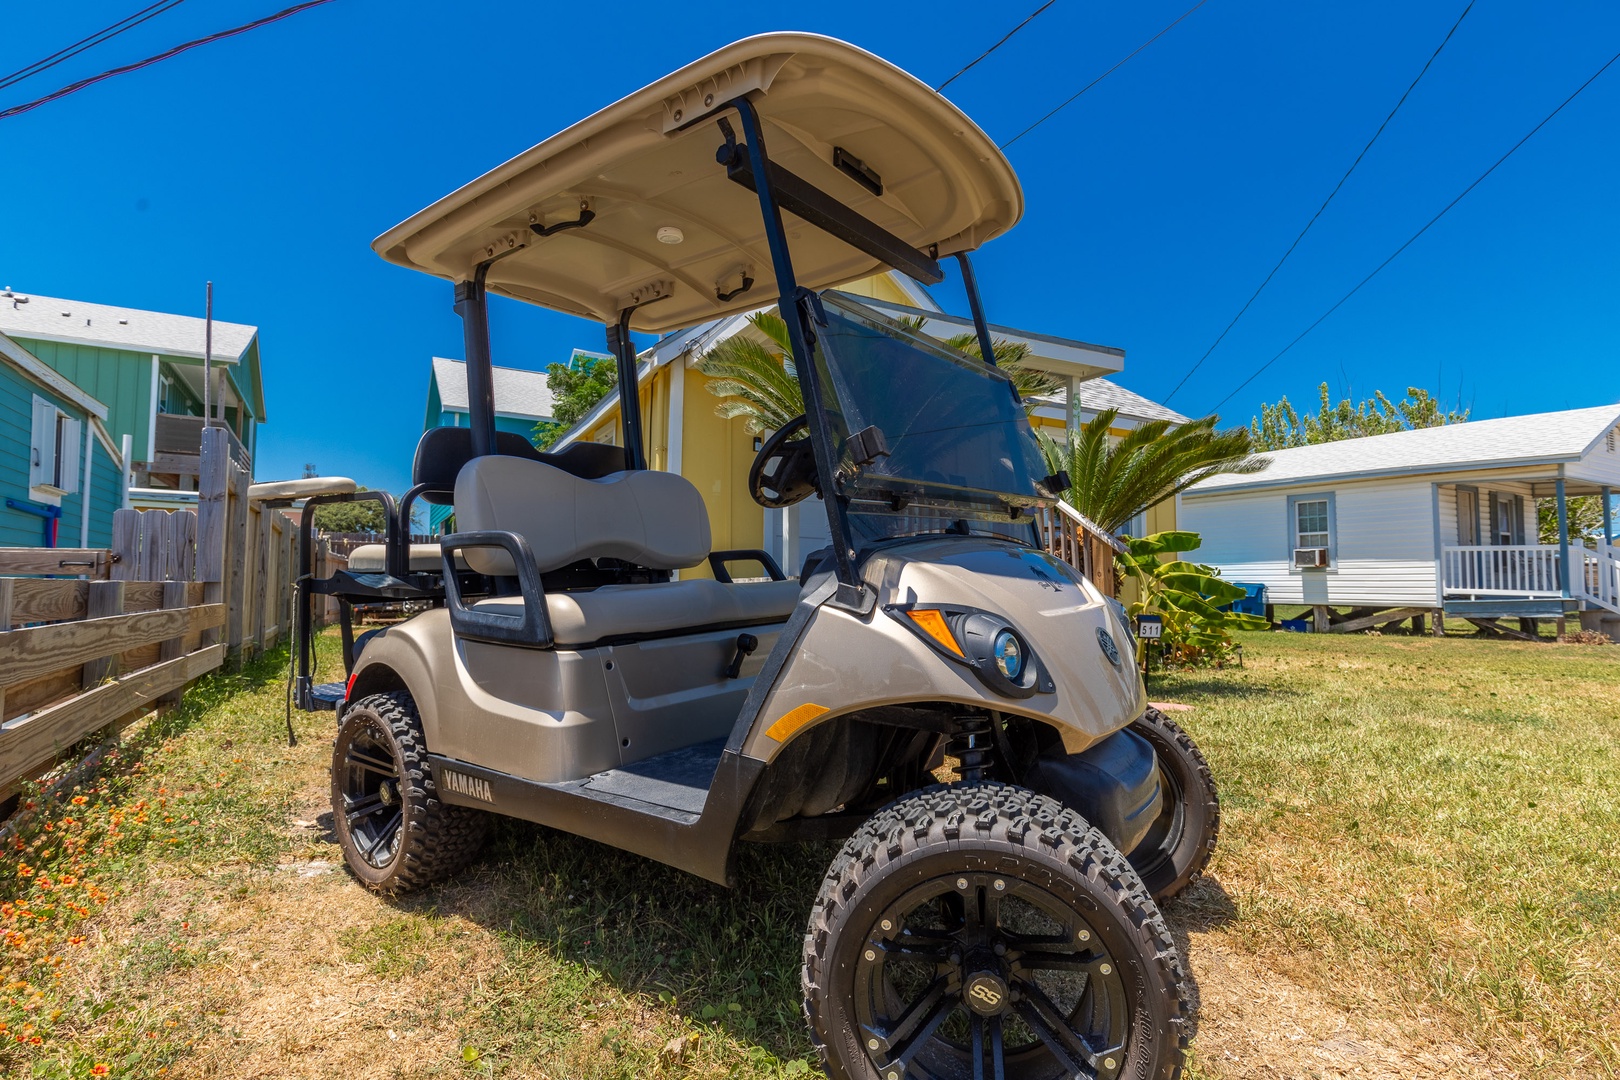 Take a cruise down to the beach on the included golf cart